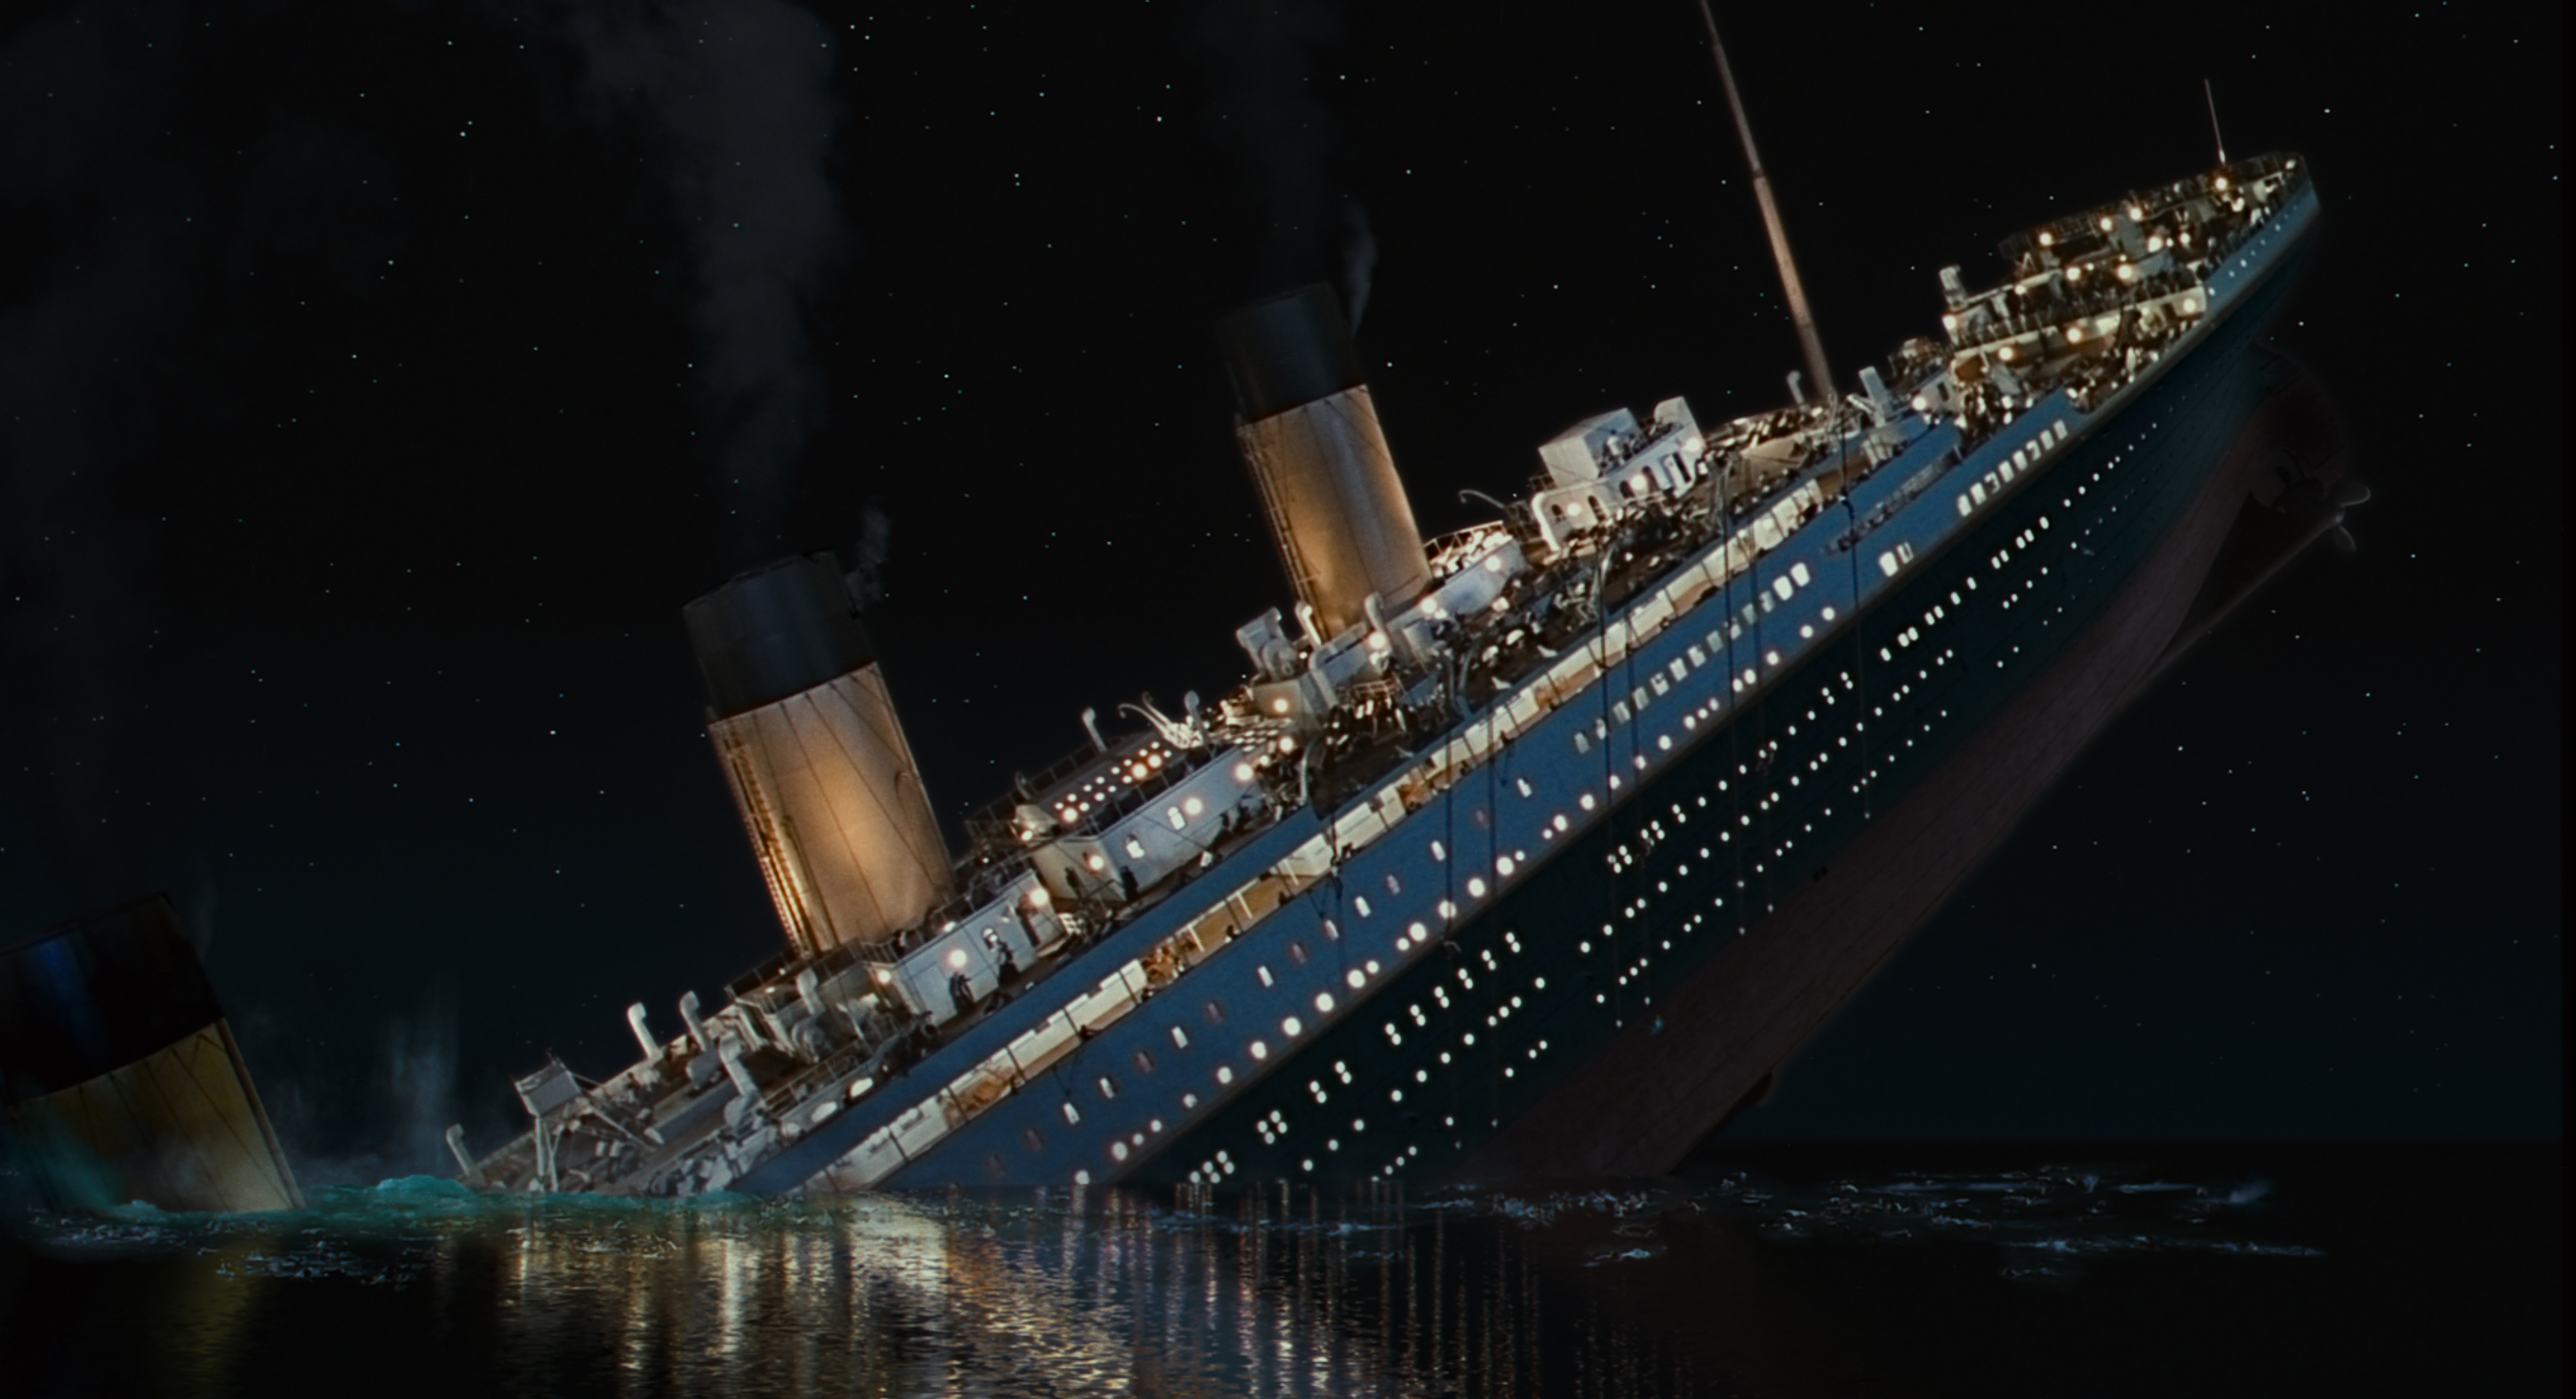 The history and sinking of the titanic